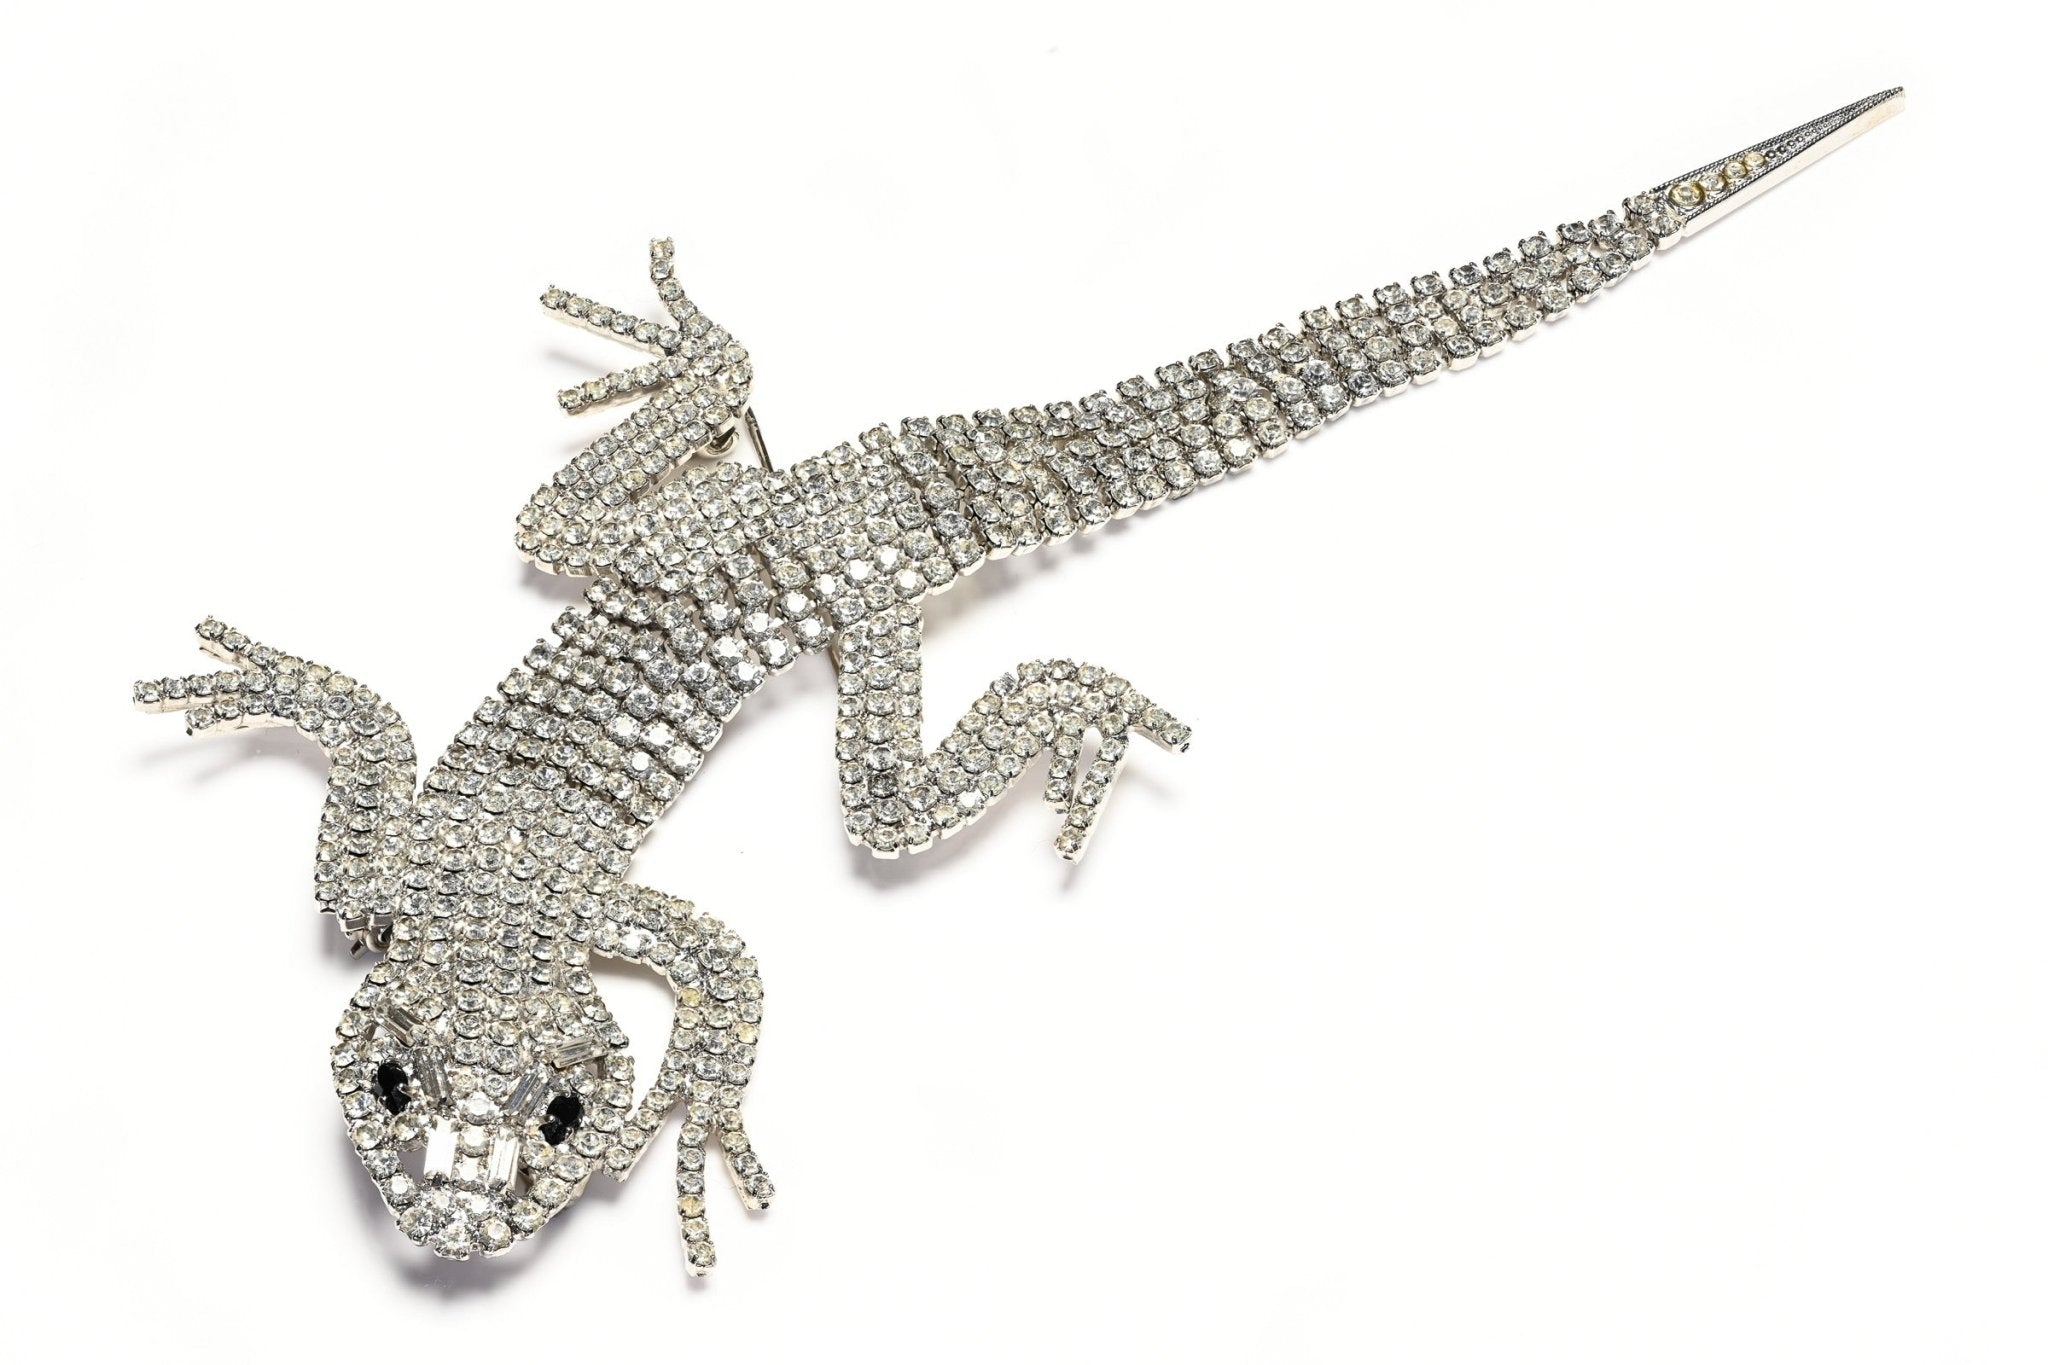 Vintage 1980's Butler & Wilson Large Silver Tone Articulated Crystal Lizard Brooch